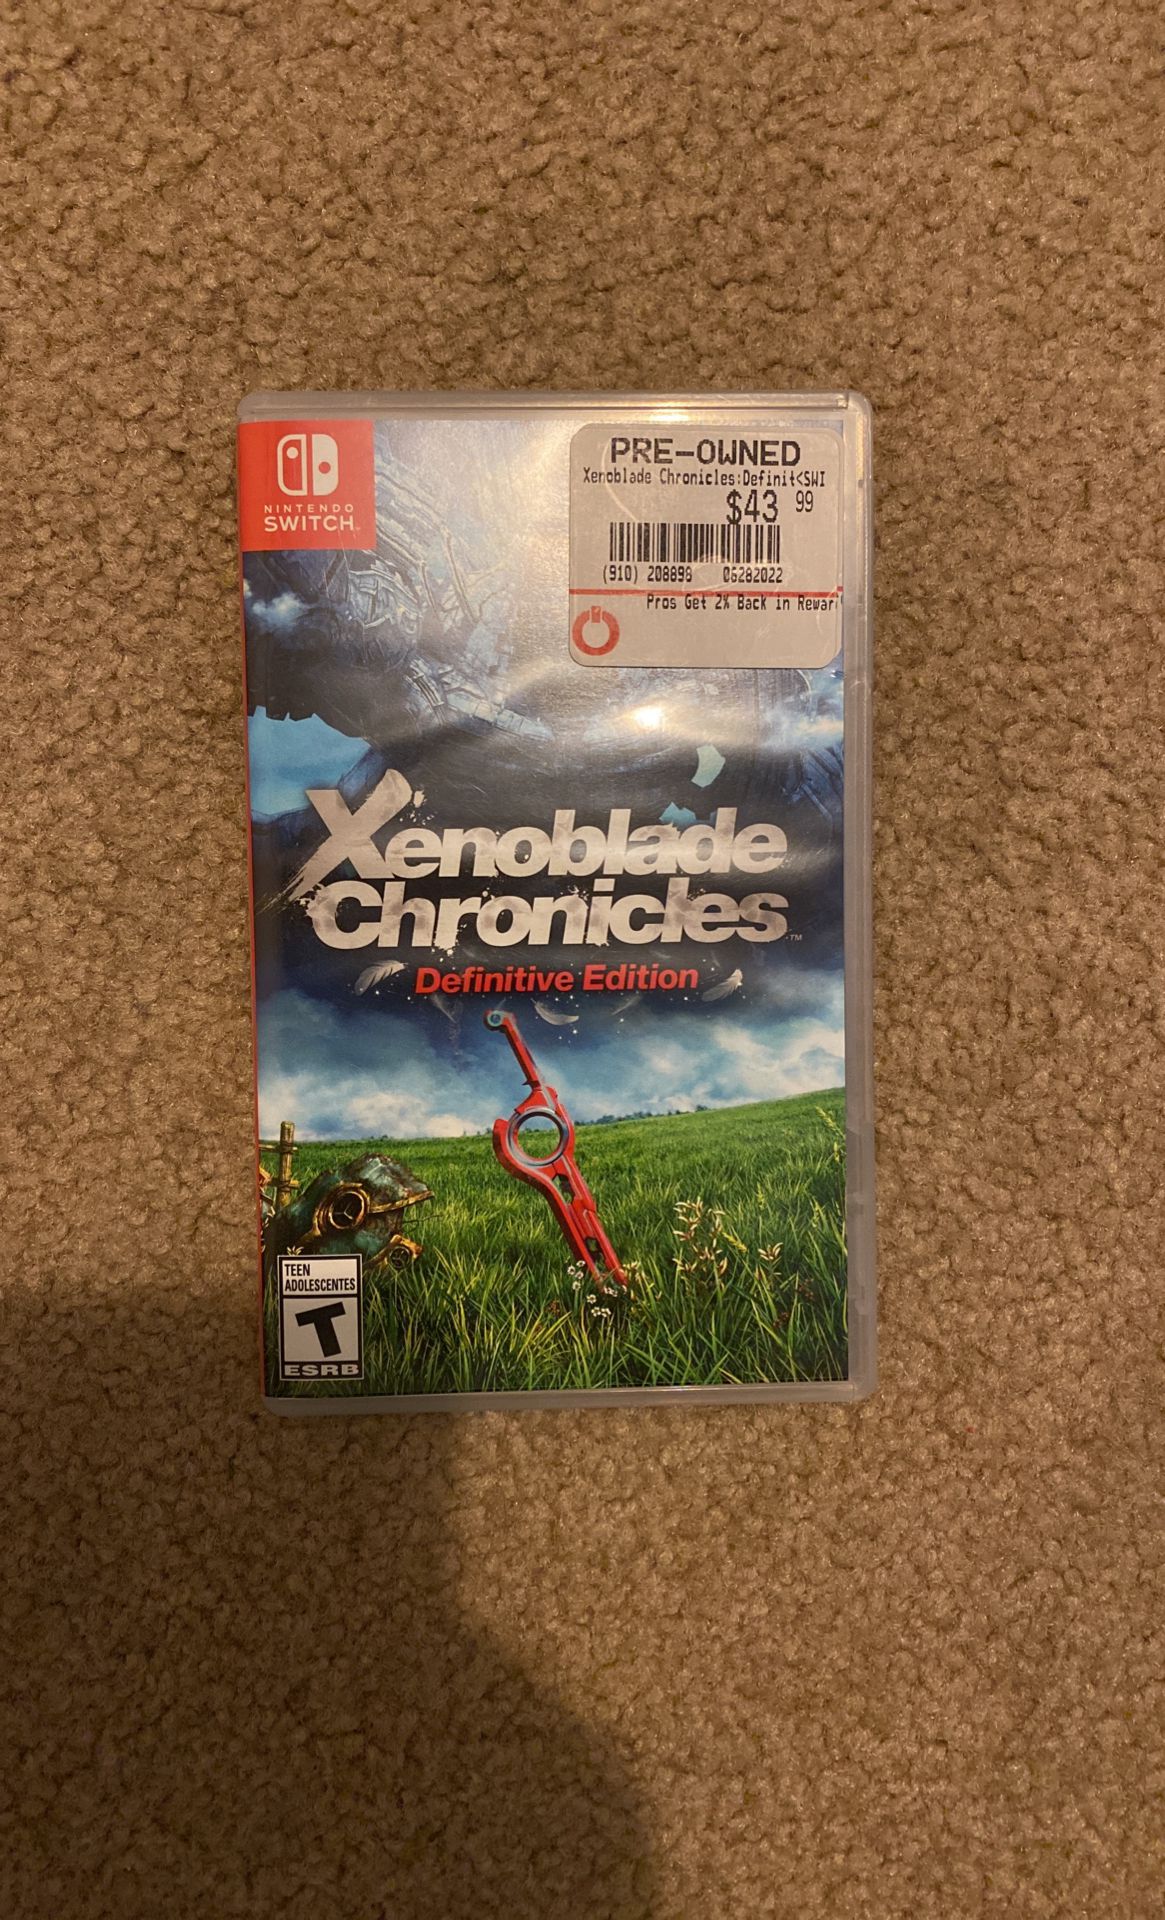 Xenoblade Chronicles Definitive Edition - Nintendo Switch game w/case